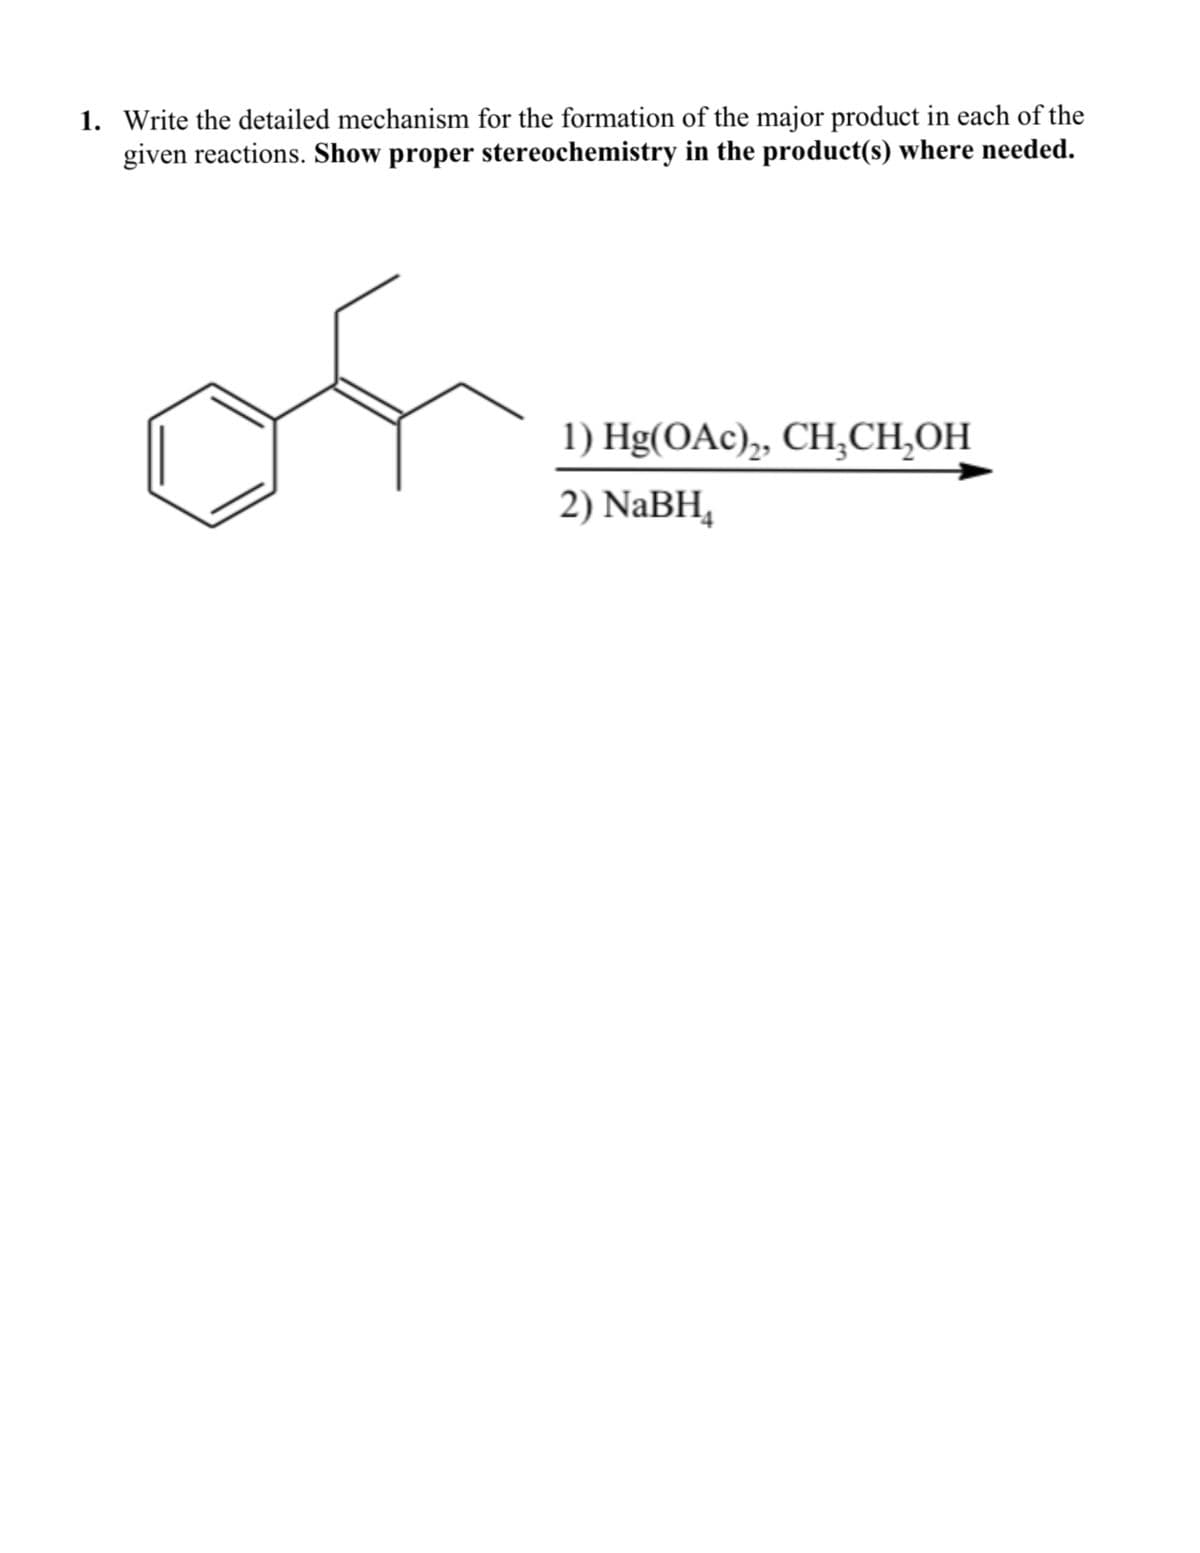 1. Write the detailed mechanism for the formation of the major product in each of the
given reactions. Show proper stereochemistry in the product(s) where needed.
1) Hg(OAc)2, CH₂CH₂OH
2) NaBH4